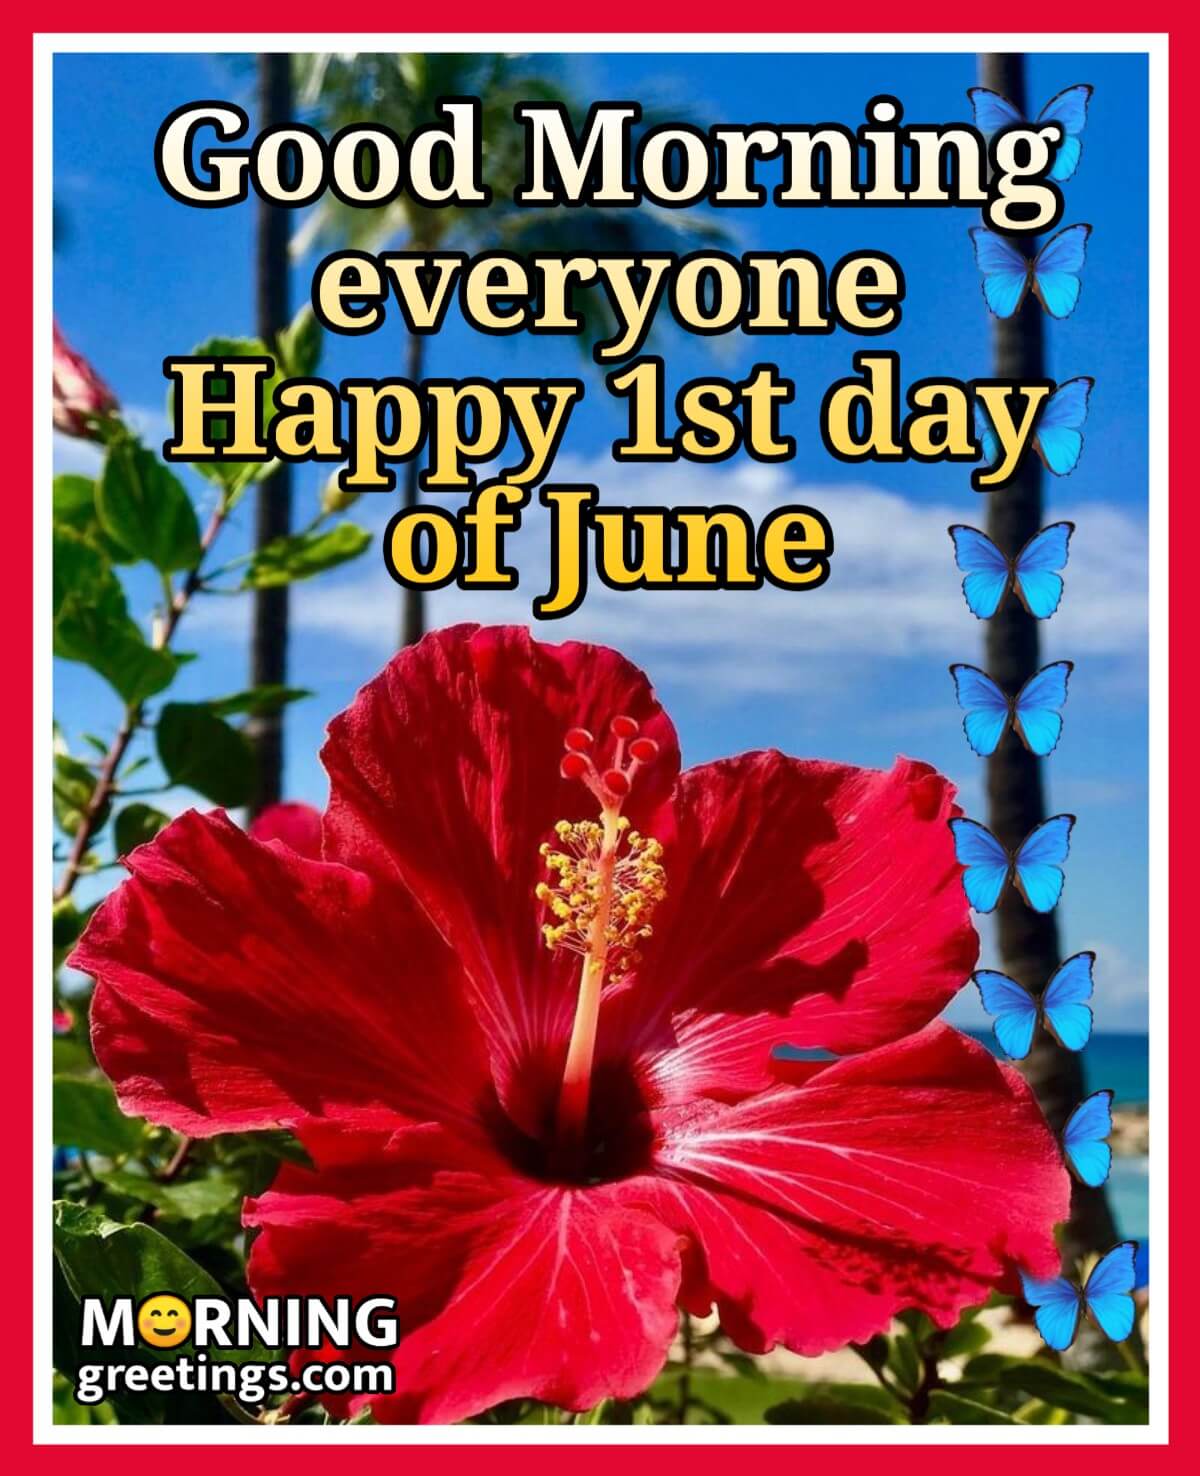 Good Morning Everyone Happy 1st Day Of June